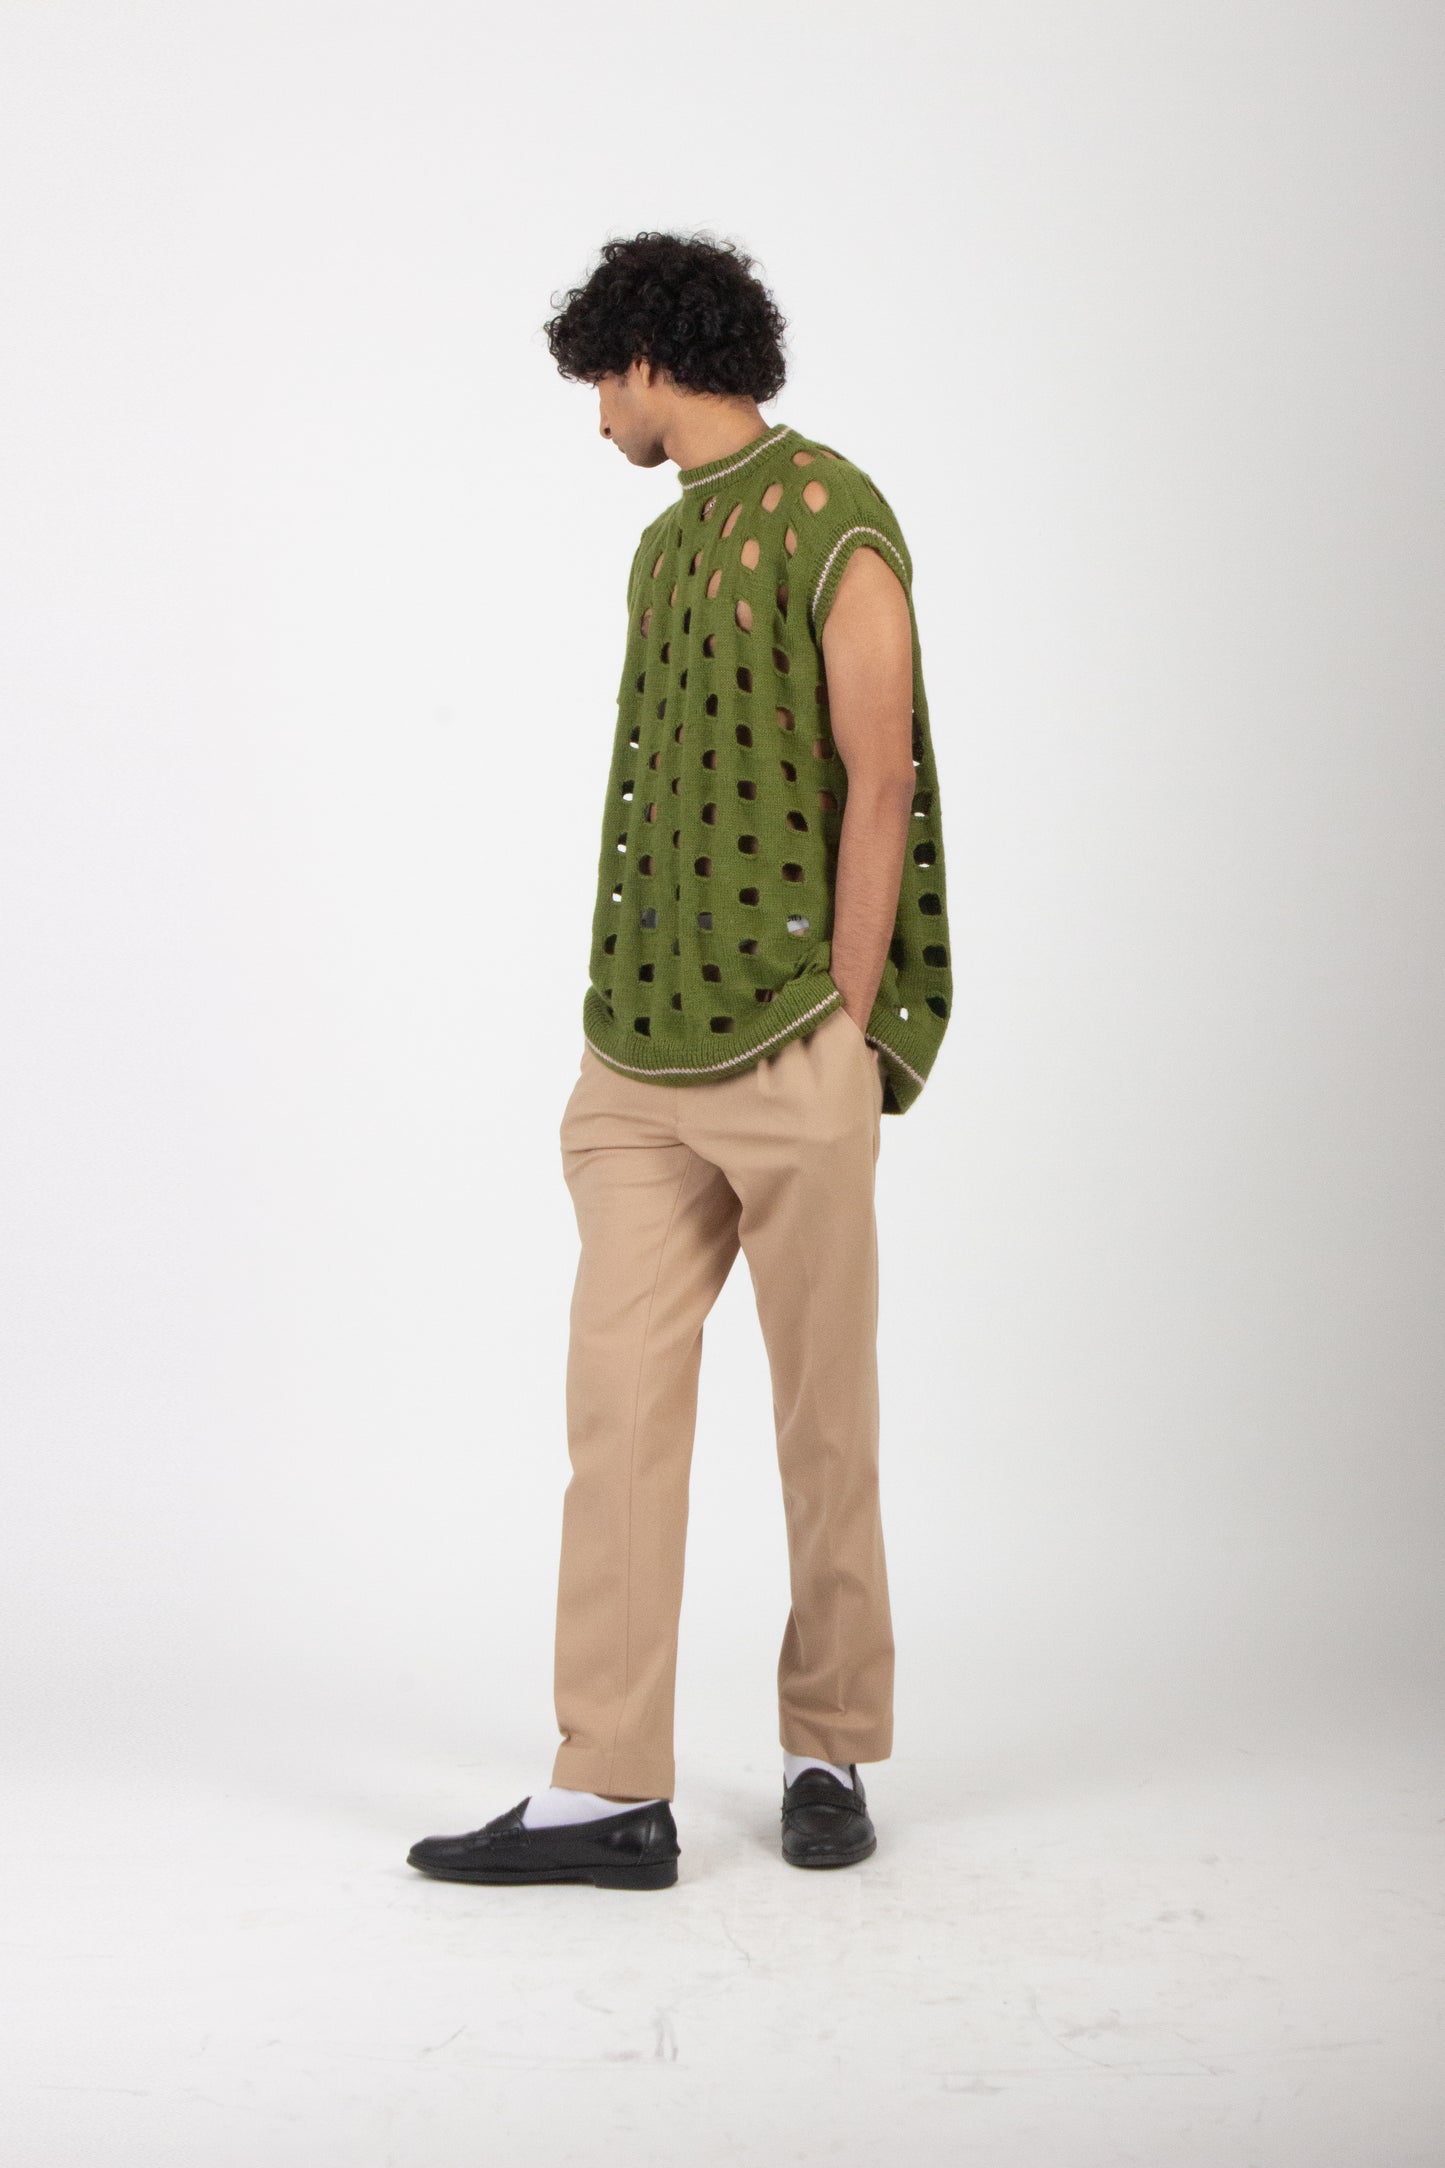 Hand Knitted Olive Vest